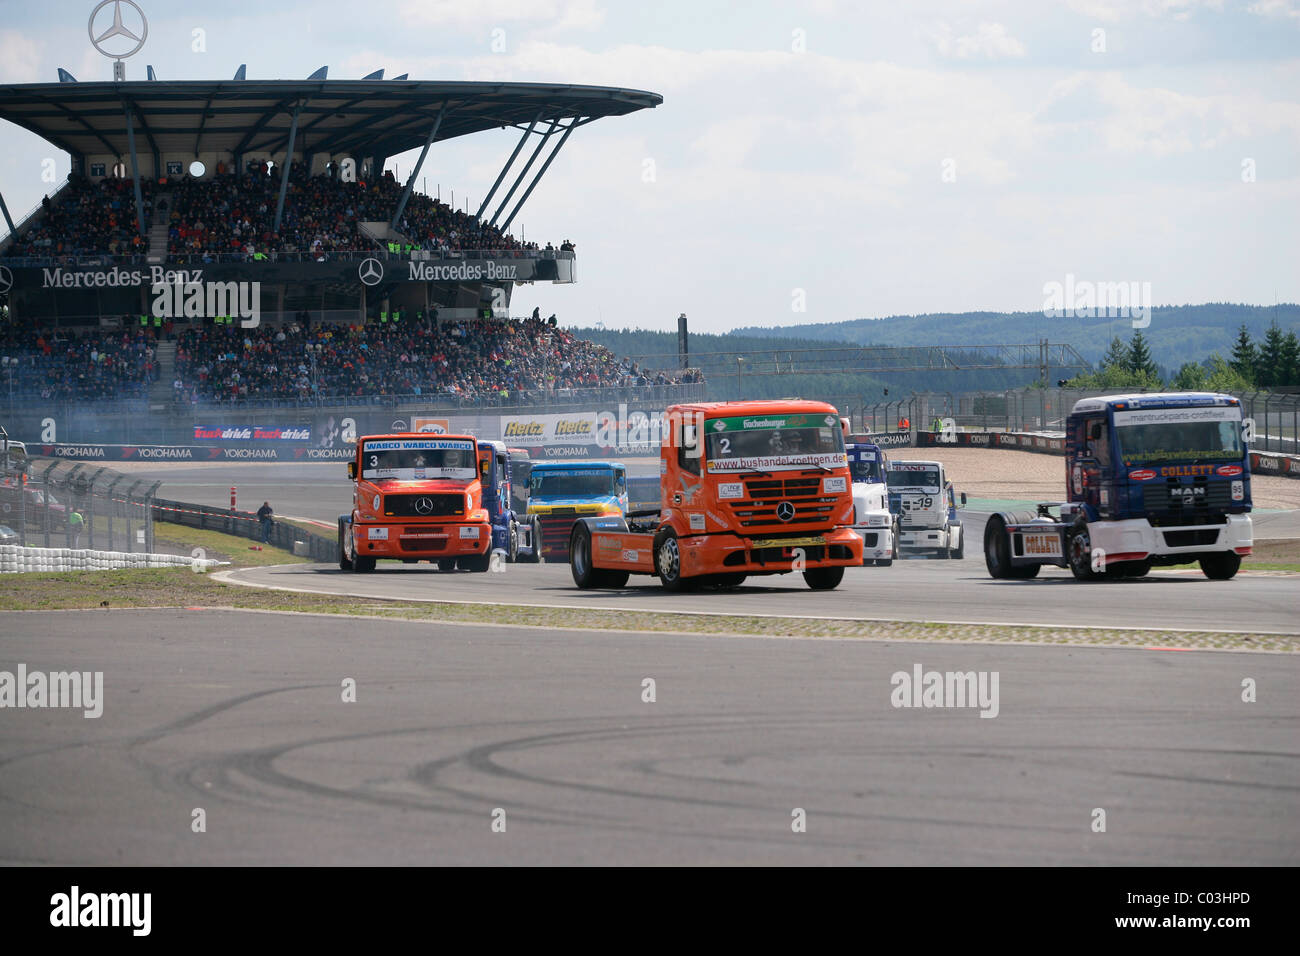 ADAC Truck Grand Prix Nuerburgring 2010, Country Festival, start of the Mittelrhein Cup race, Nuerburgring race track Stock Photo